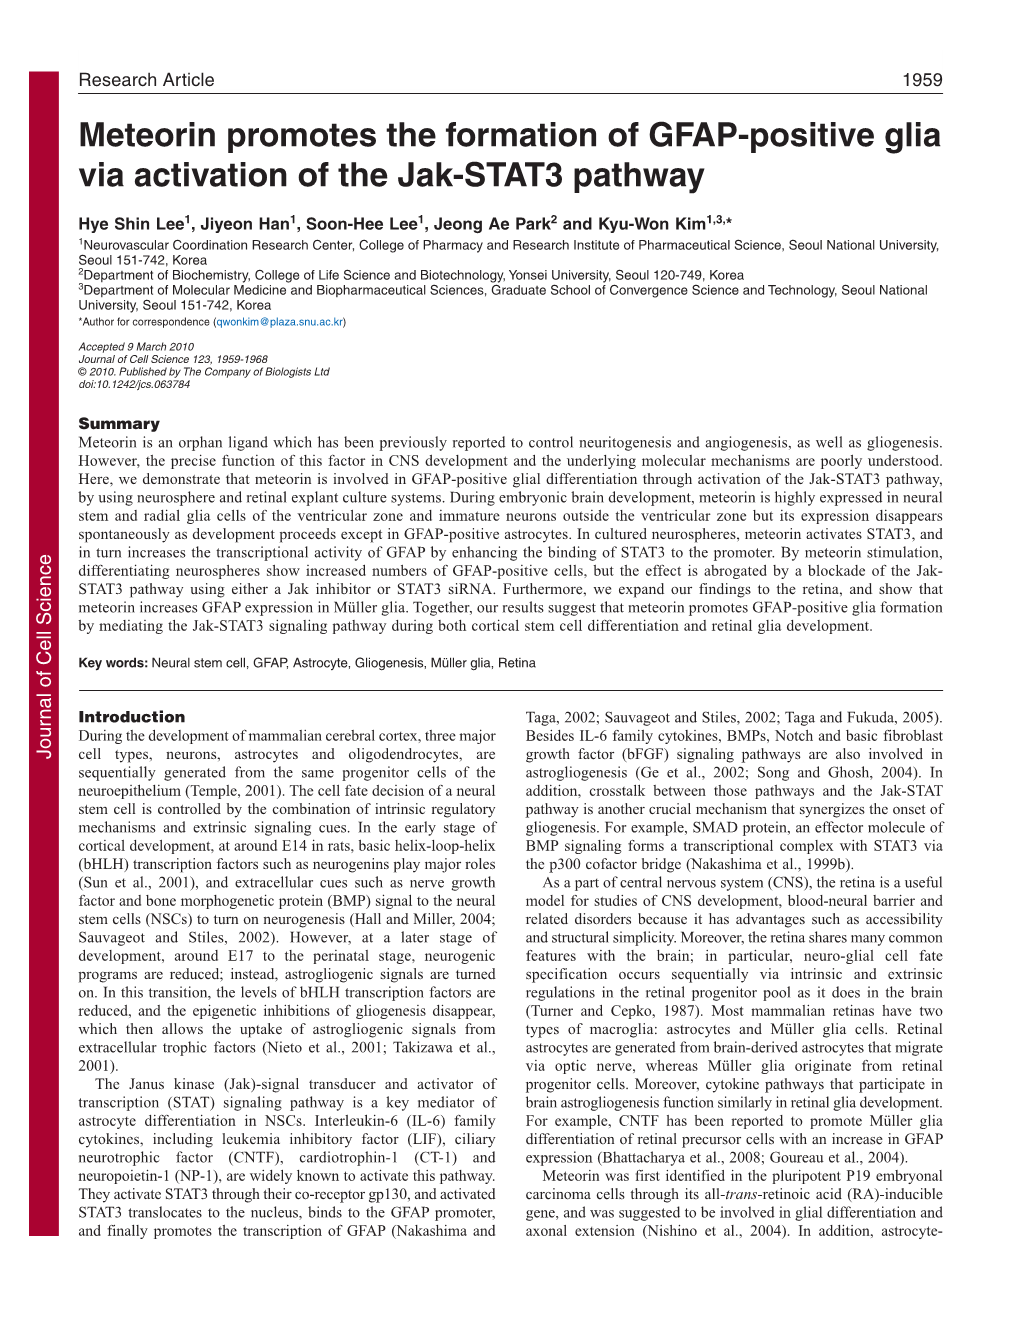 Meteorin Promotes the Formation of GFAP-Positive Glia Via Activation of the Jak-STAT3 Pathway